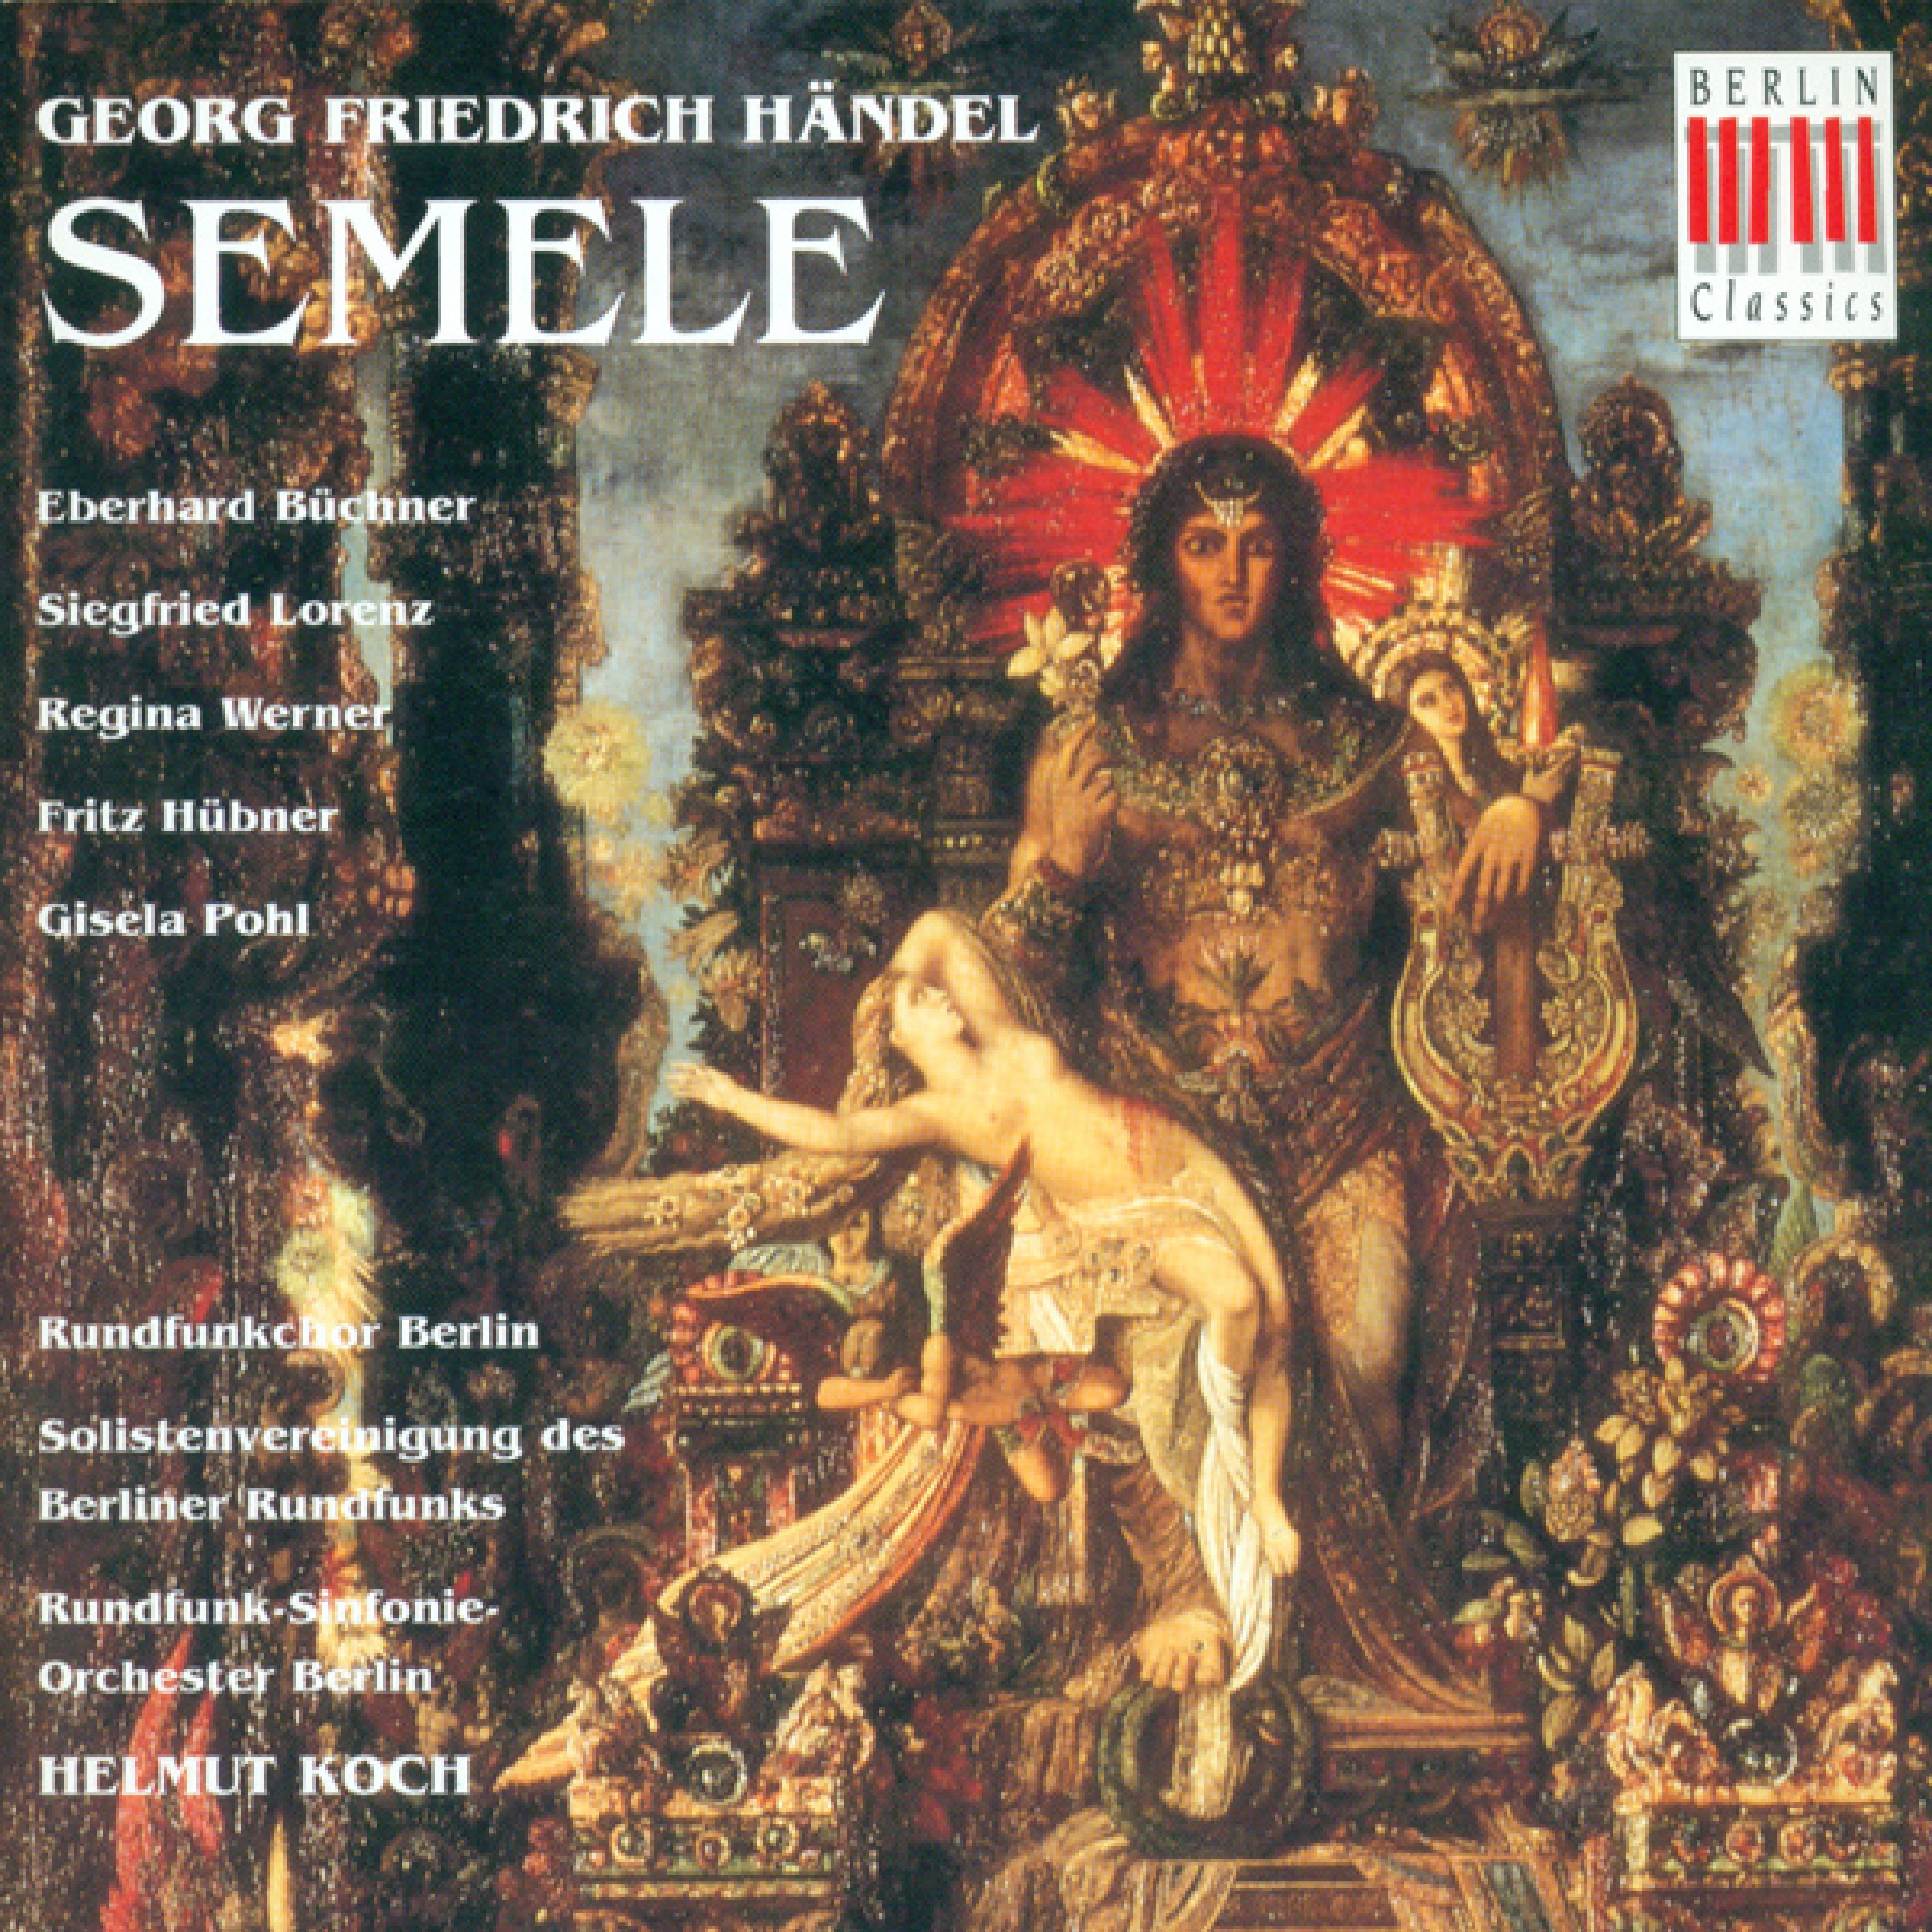 Semele, HWV 58: Act I - "Cease, cease your vows, 'tis impious to proceed"